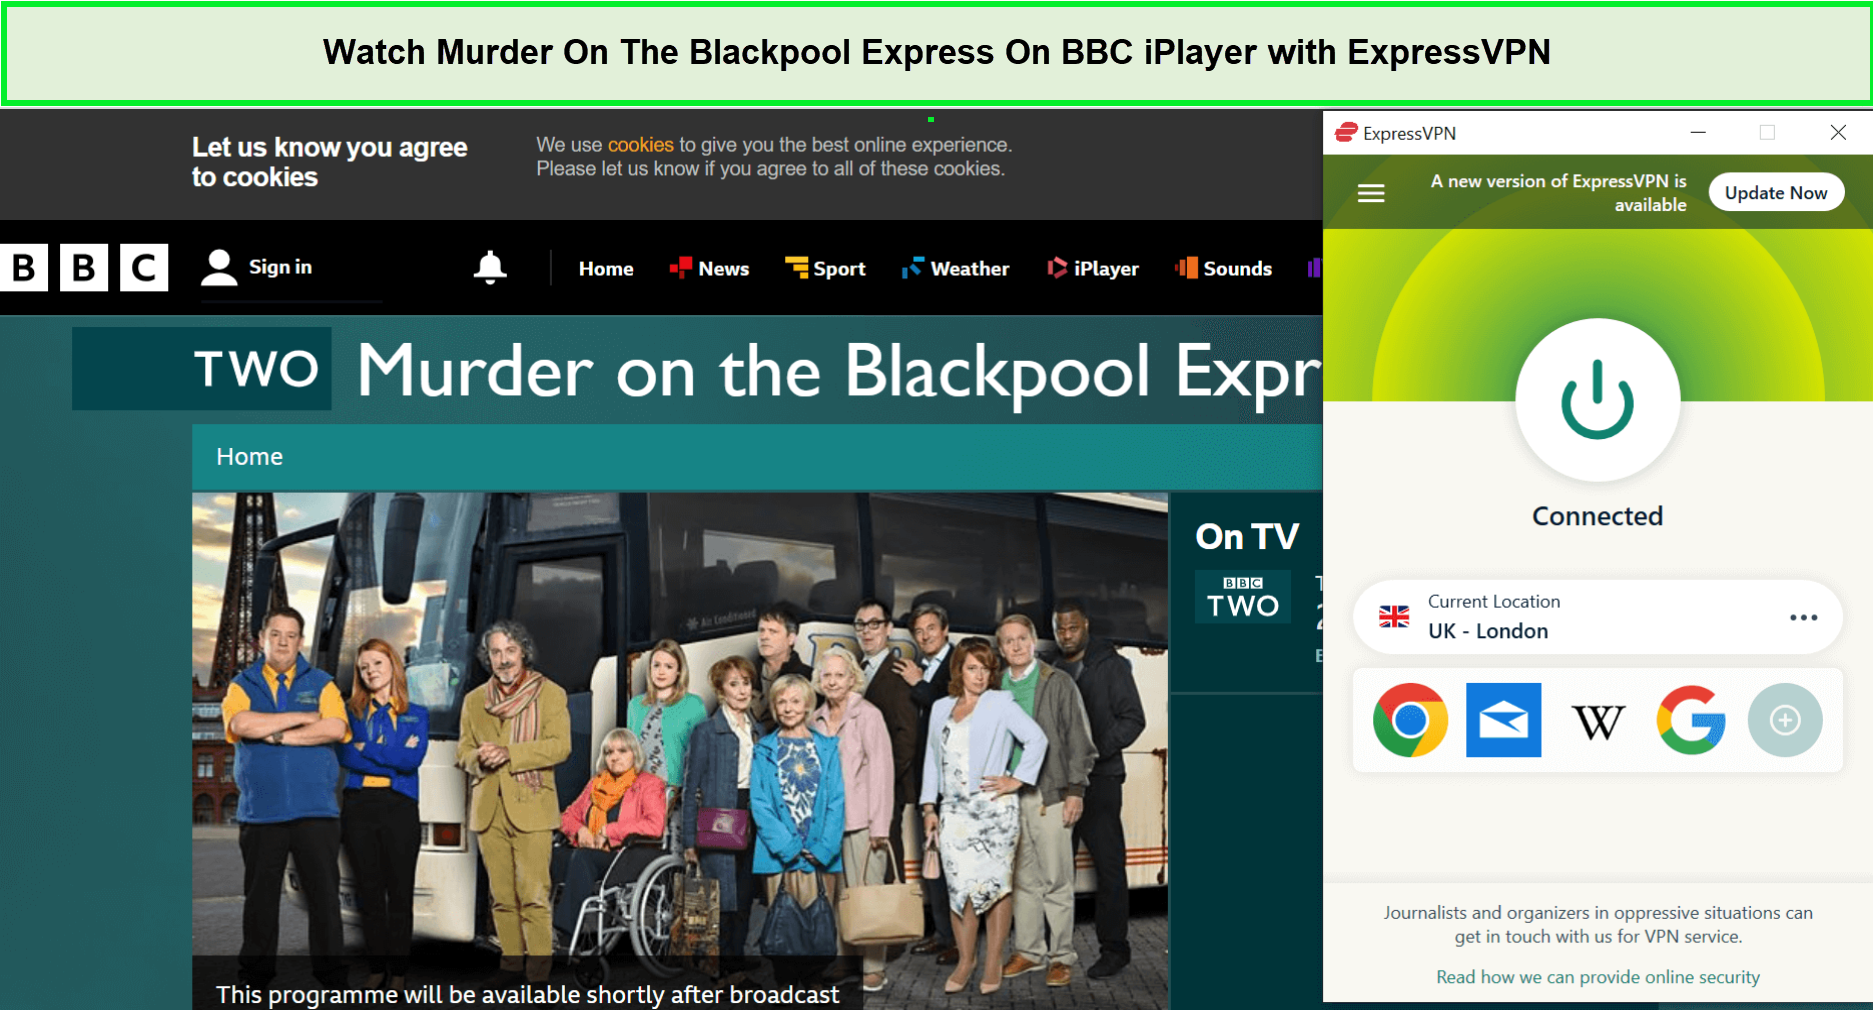 Watch-Murder-On-The-Blackpool-Express-in-Hong Kong-On-BBC-iPlayer-with-ExpressVPN